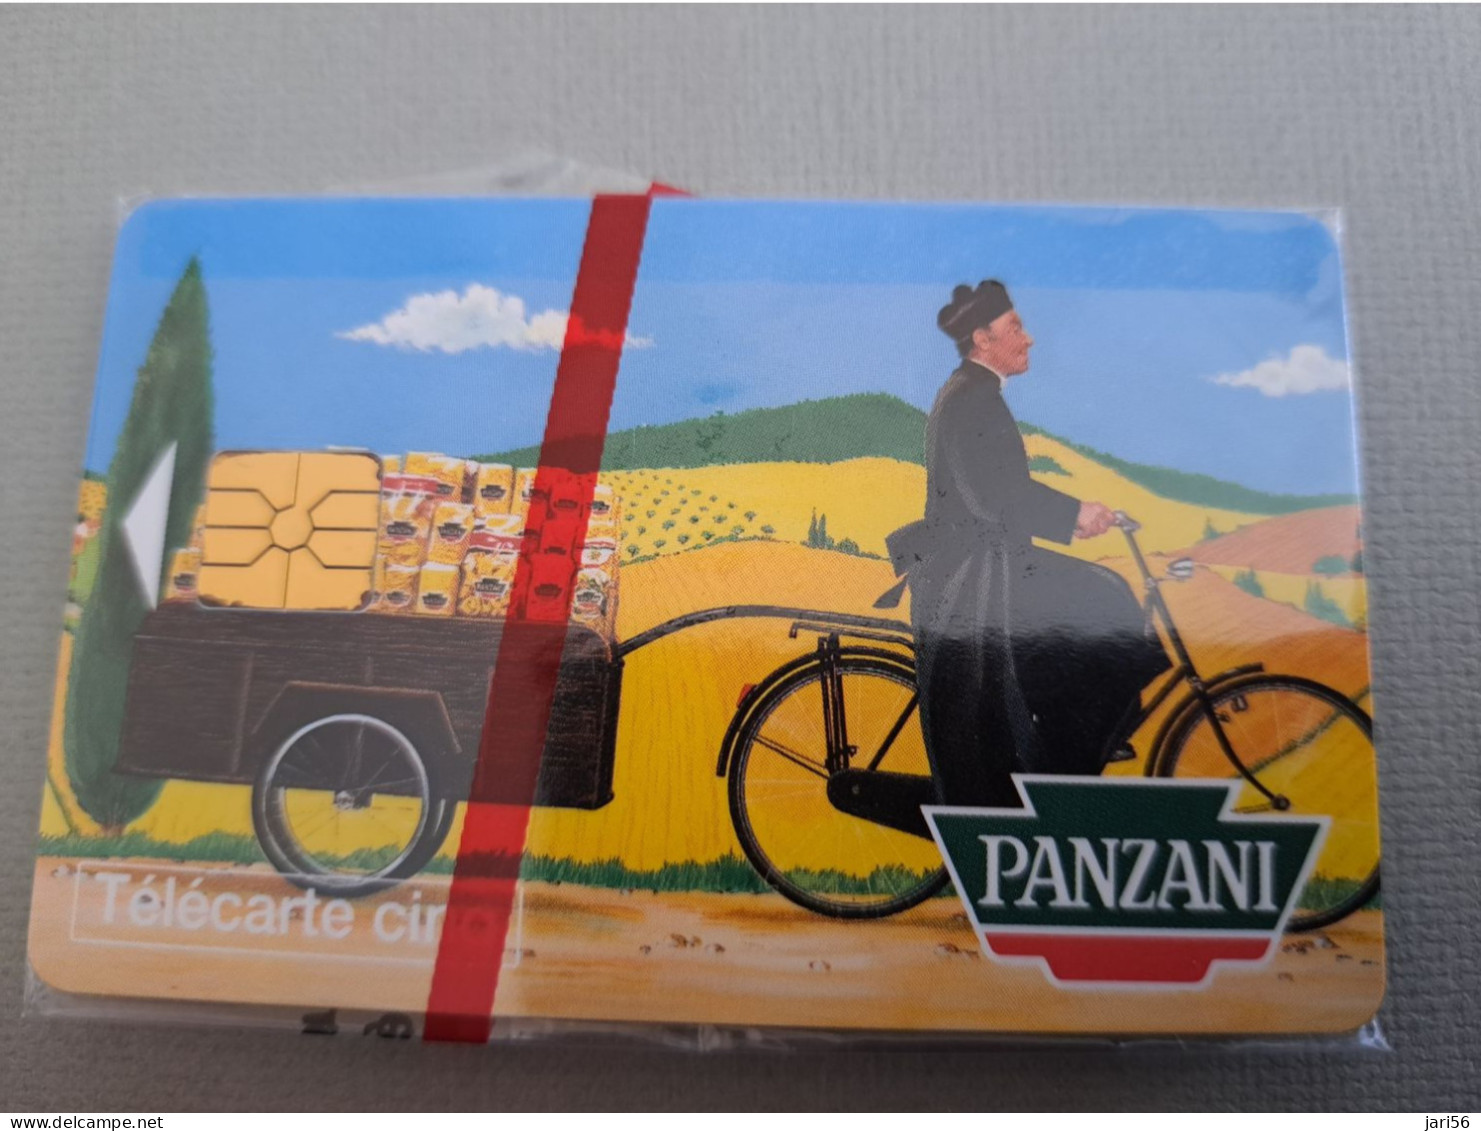 FRANCE/FRANKRIJK   CHIPCARD / PRIVE/ TELECARTE CINQ/ PANZANI/BYCICLE   MINT IN WRAPPER     WITH CHIP     ** 13633** - Nachladekarten (Handy/SIM)